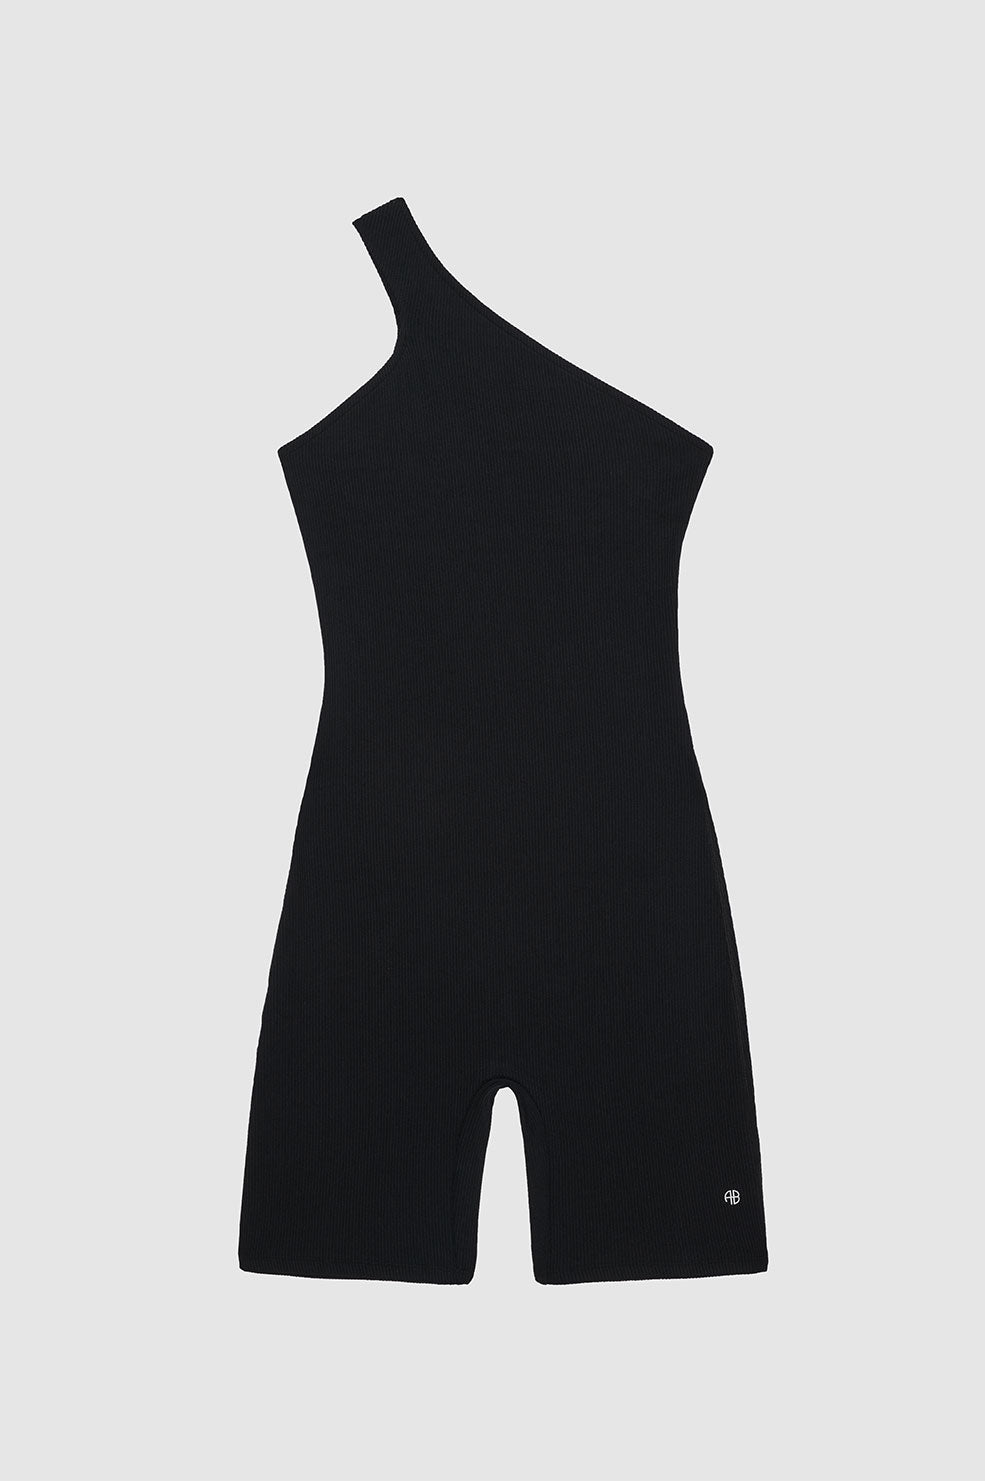 ANINE BING Lore One Piece - Black - Front View